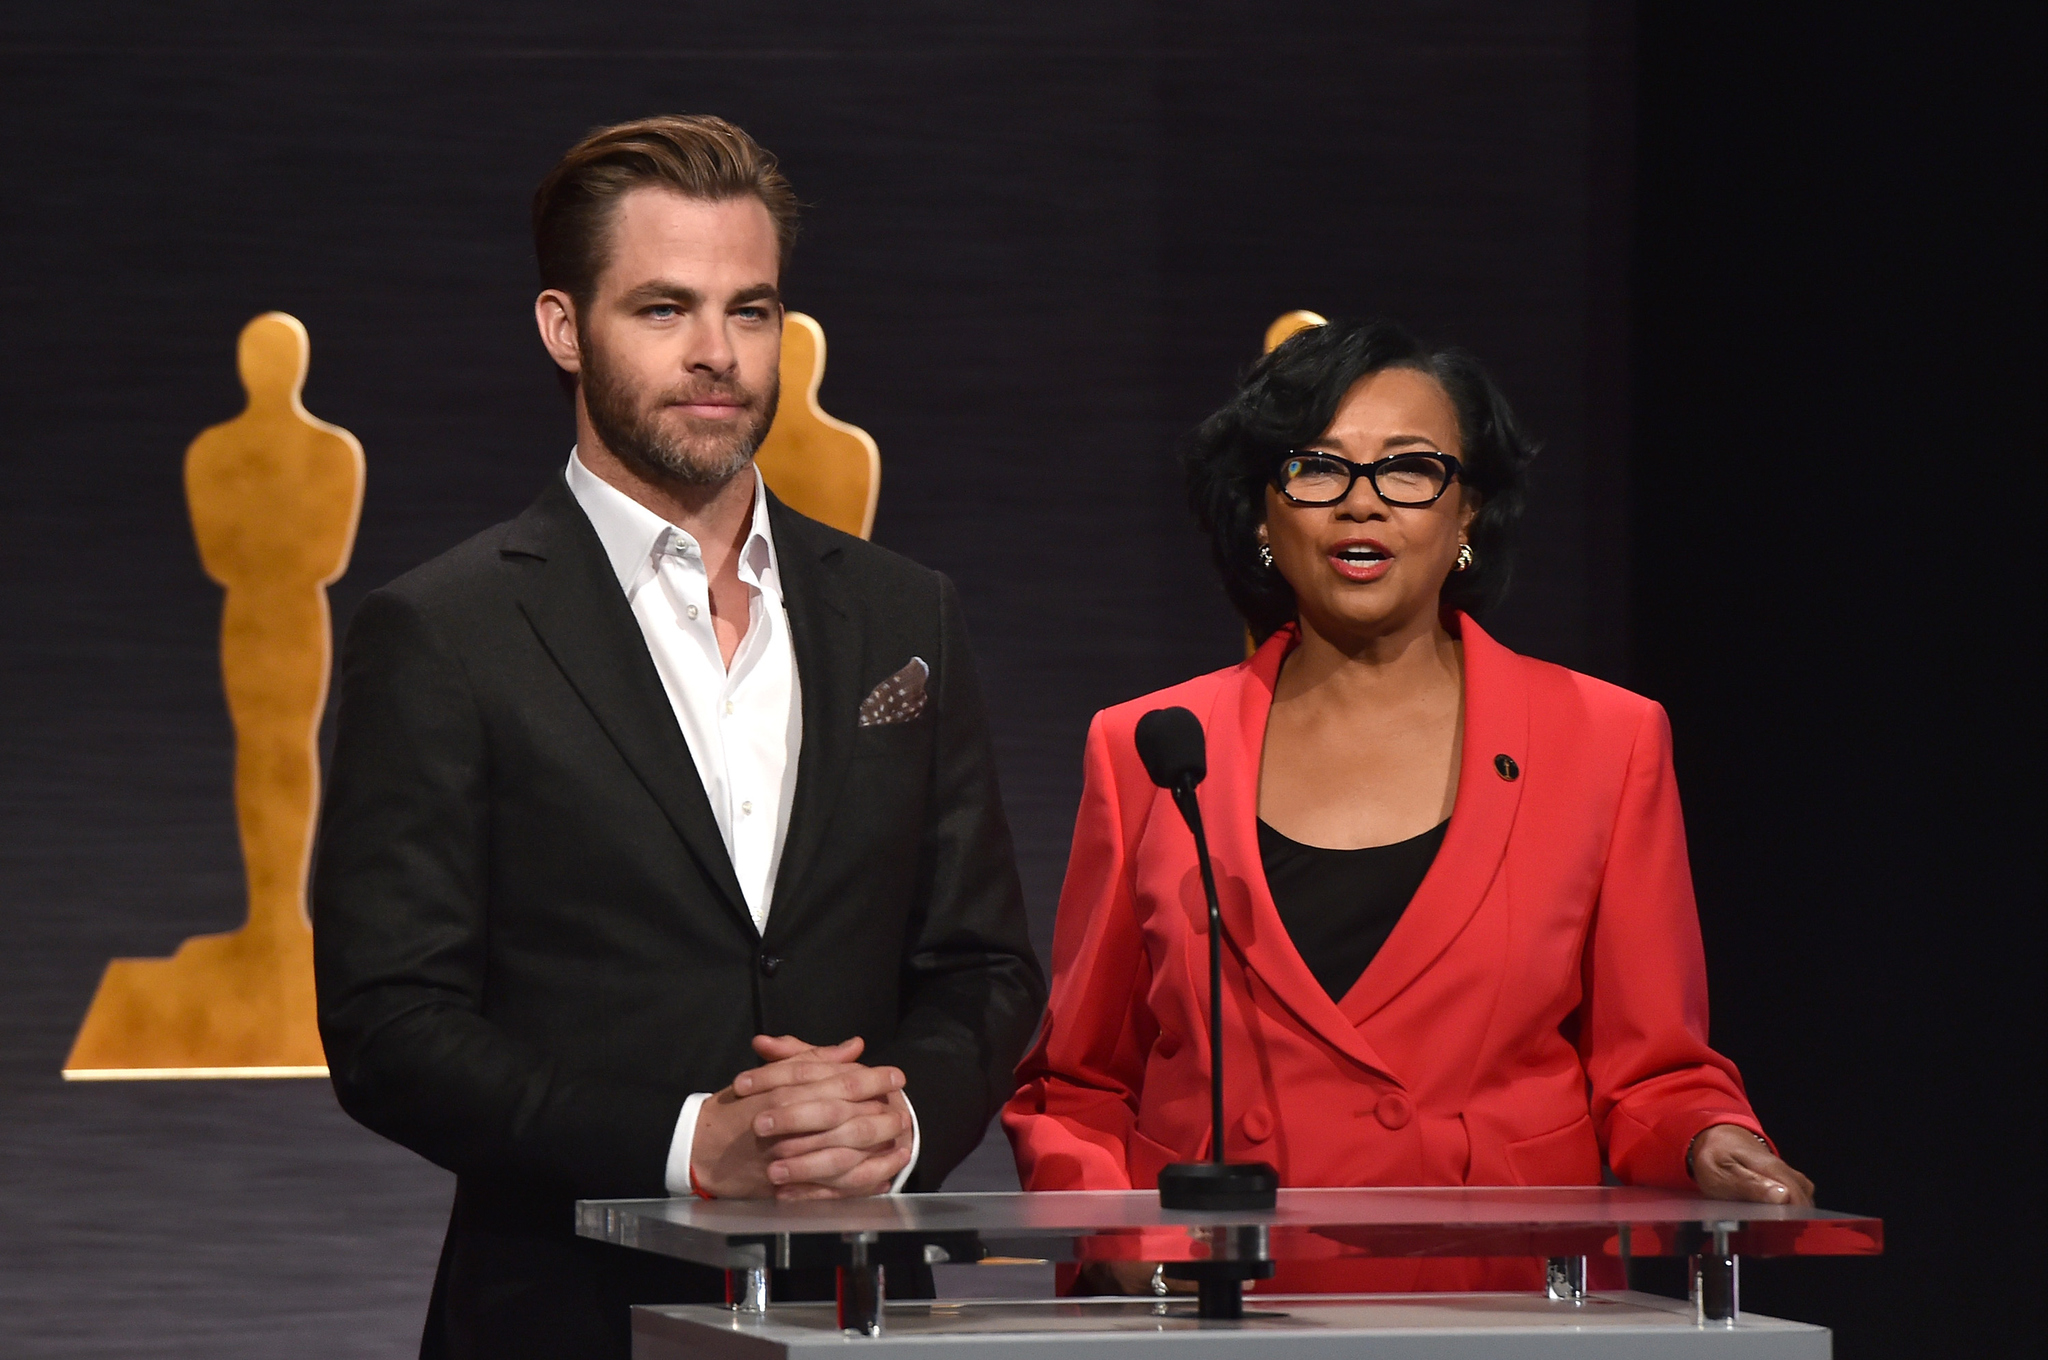 Chris Pine and Cheryl Boone Isaacs at event of The Oscars (2015)